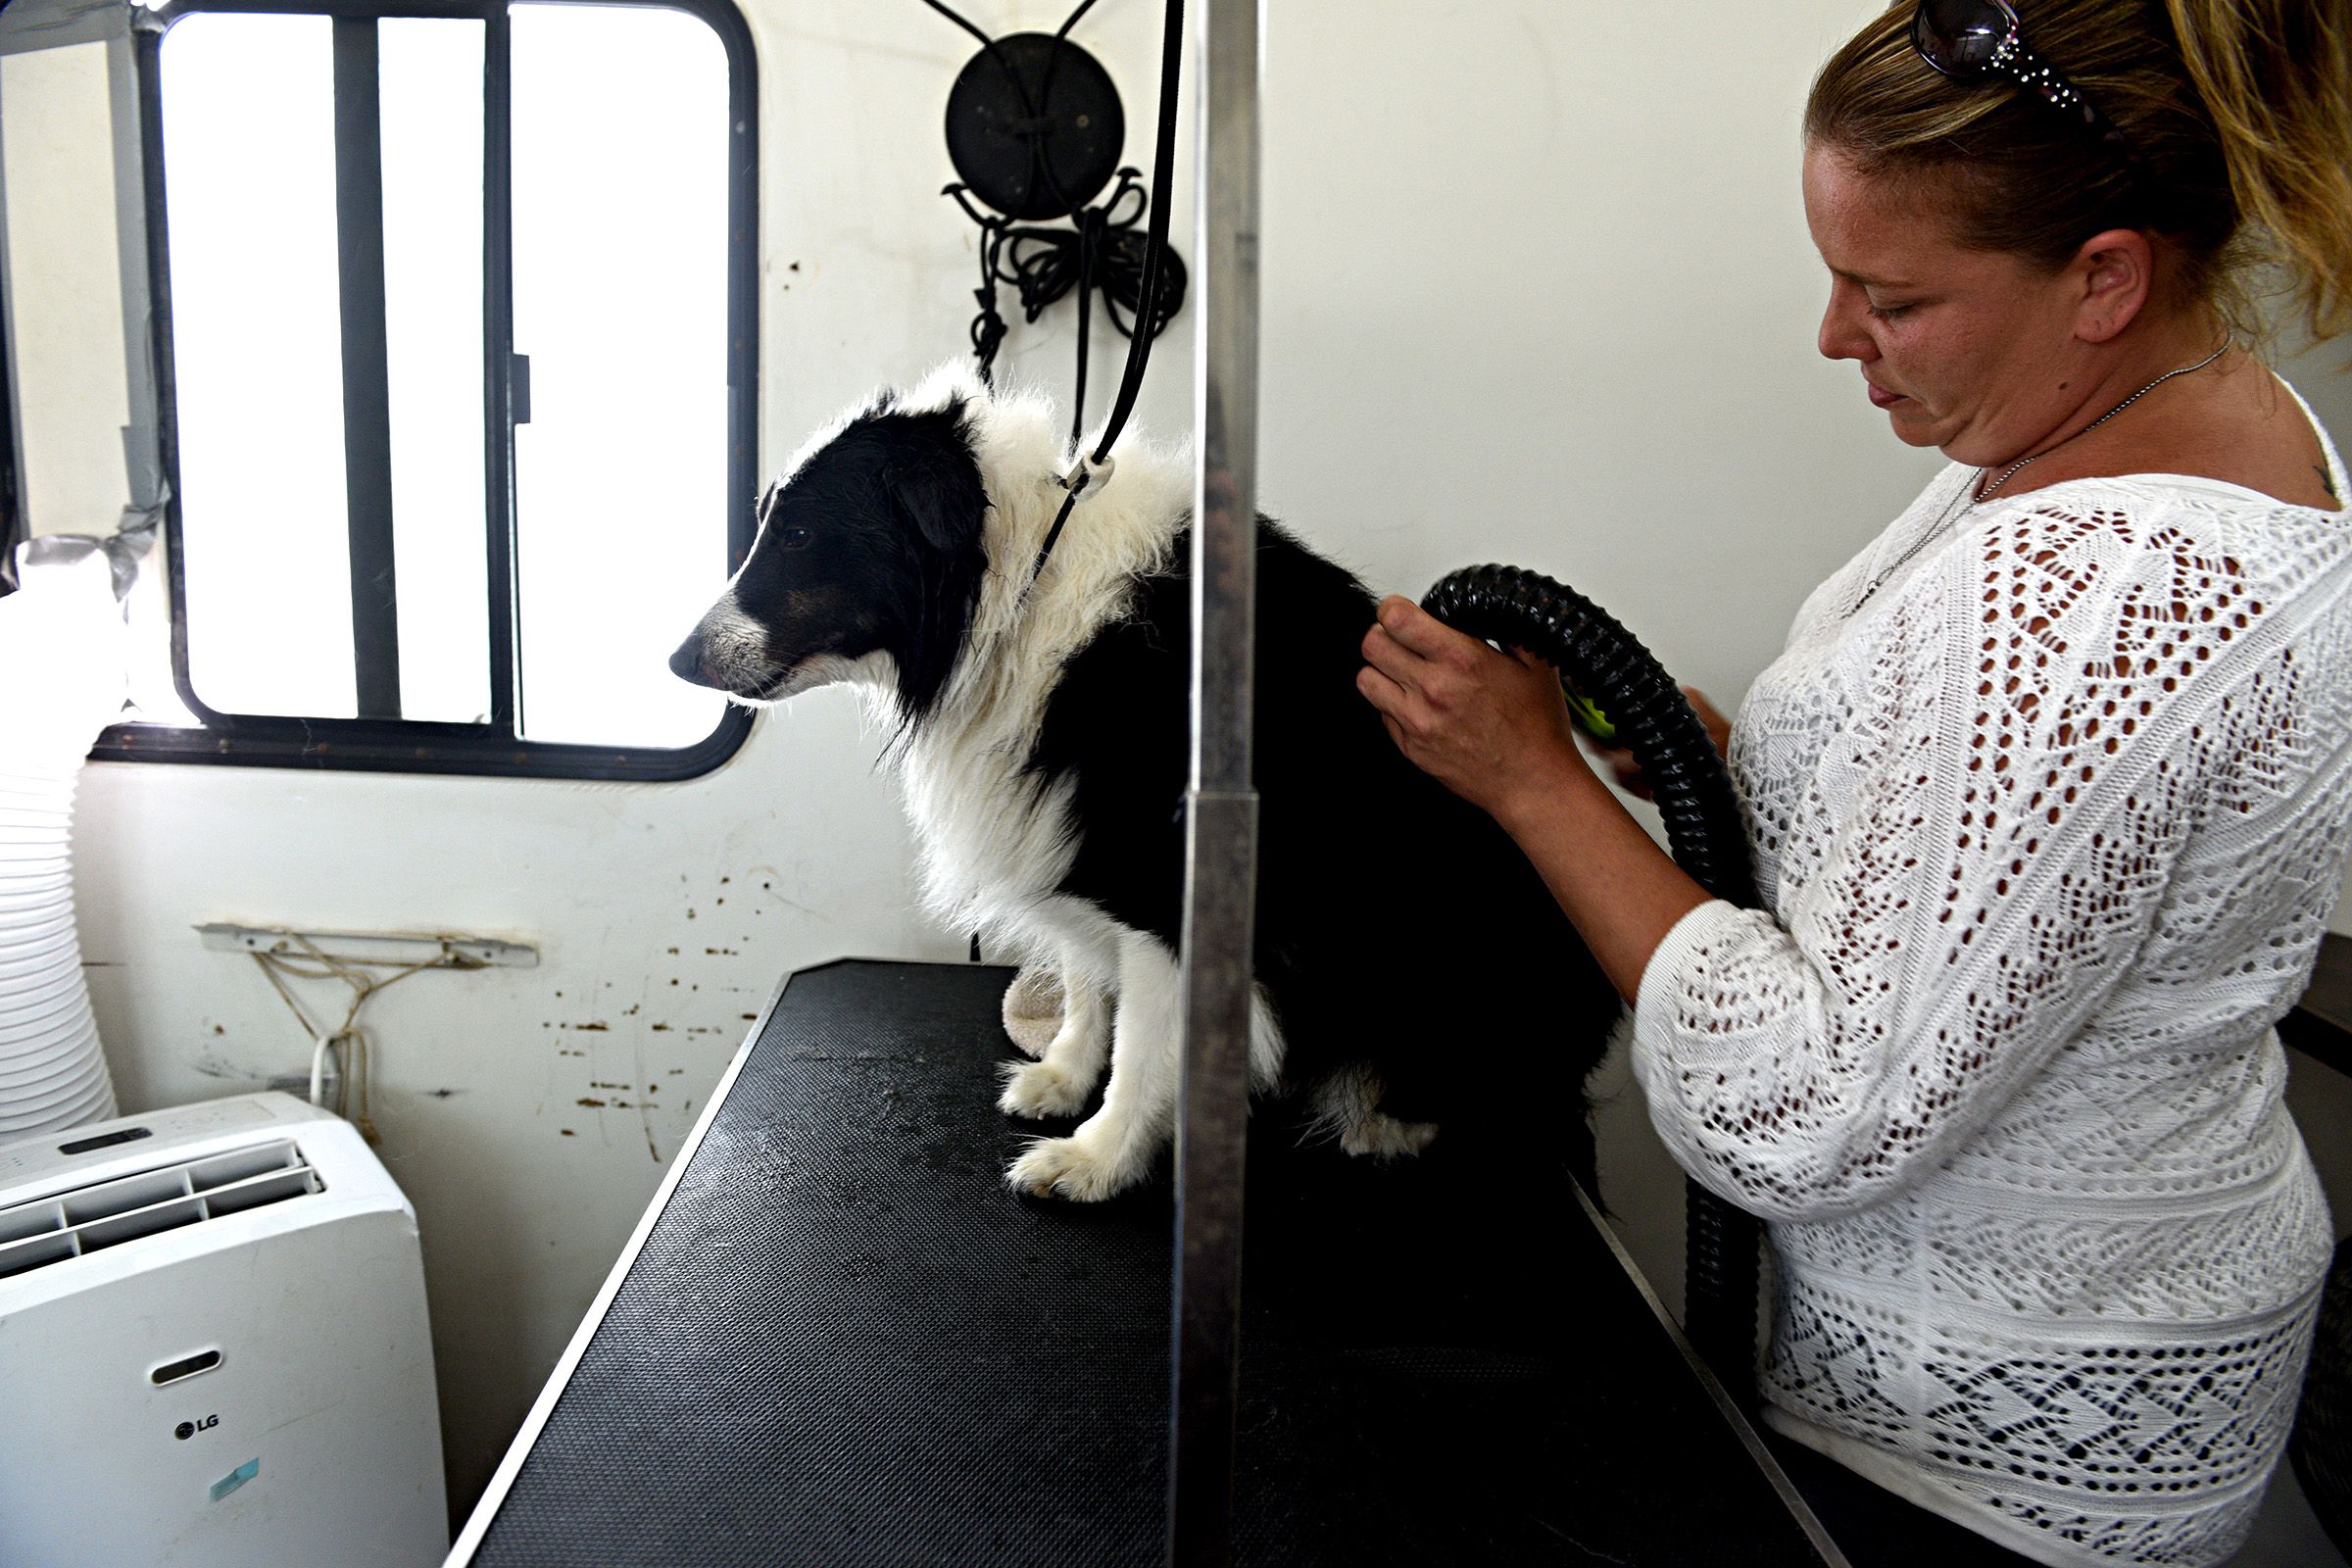 After a bath, Samantha Stanford blow dries Smokey in her mobile grooming trailer in Canaan, N.H., on Friday, June 28, 2019. (Valley News - Jennifer Hauck) Copyright Valley News. May not be reprinted or used online without permission. Send requests to permission@vnews.com.